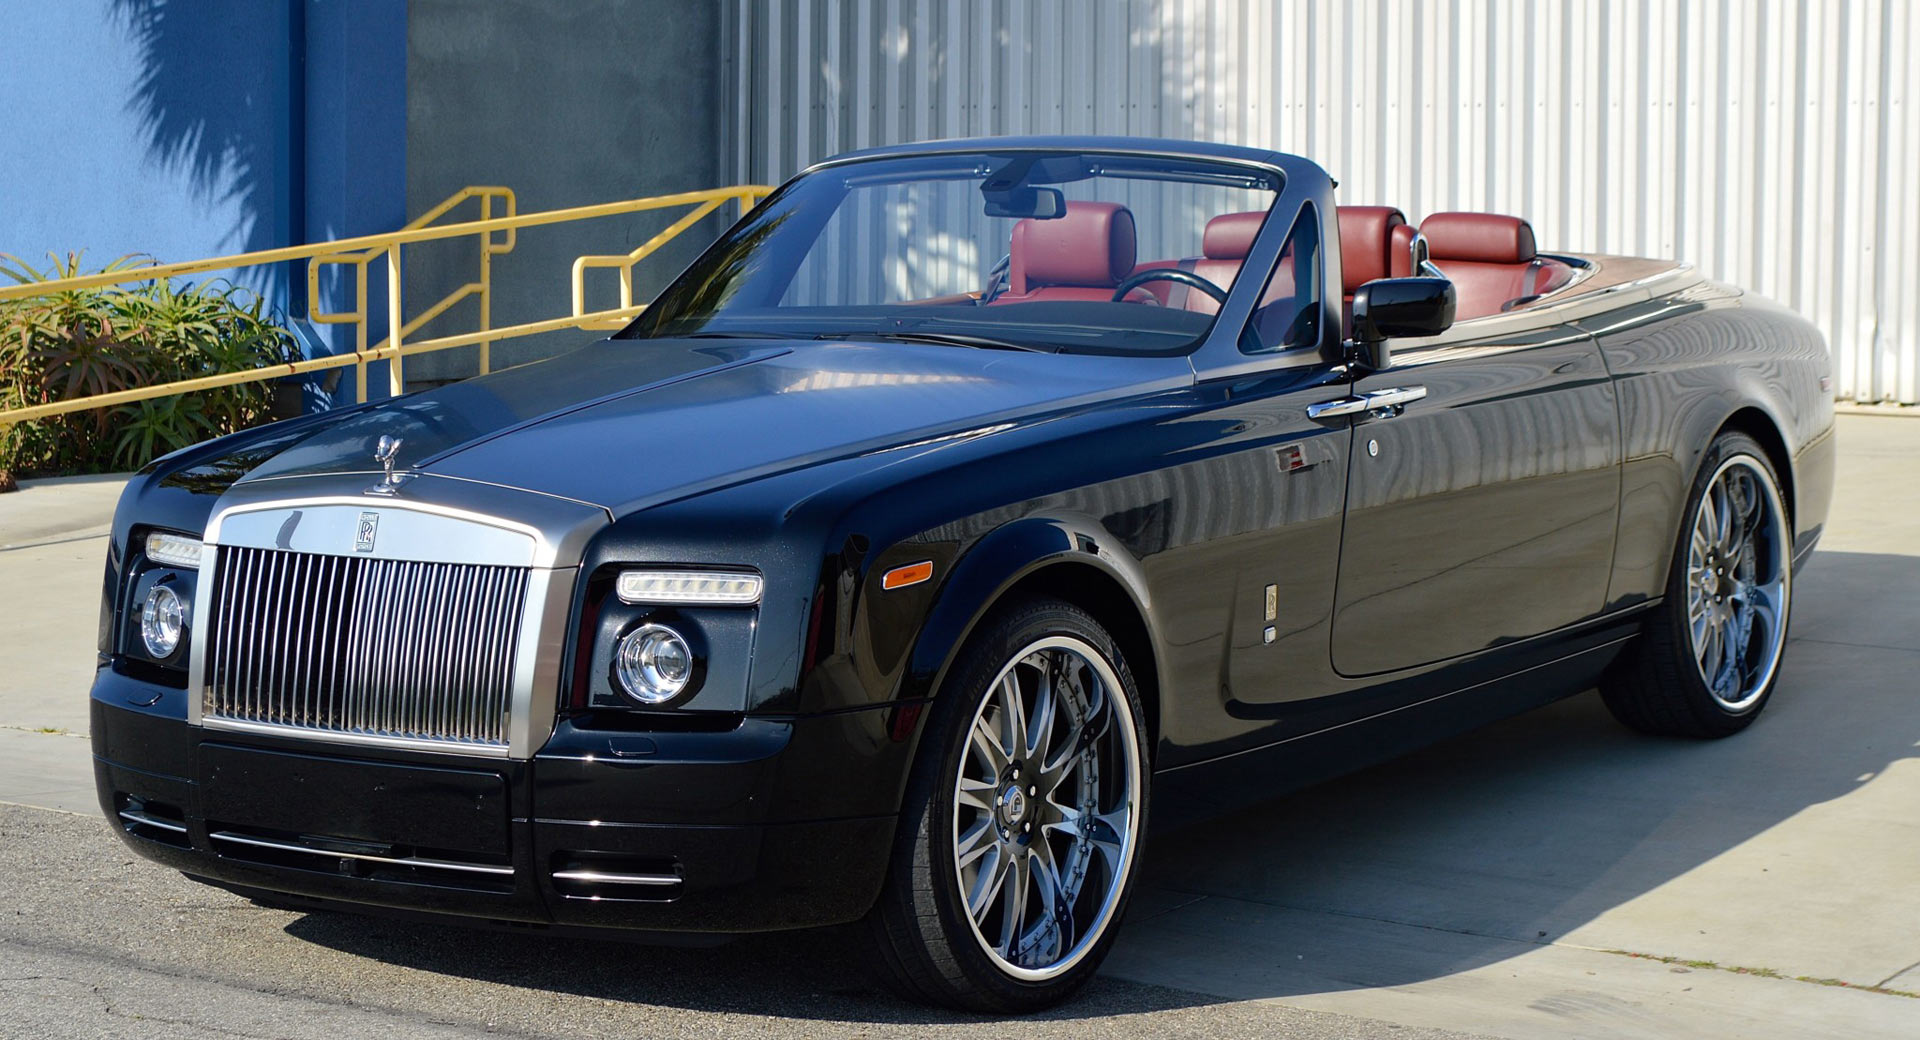 Fancy A “Cheap” Rolls-Royce? This Phantom Drophead Coupe Might Be The One |  Carscoops